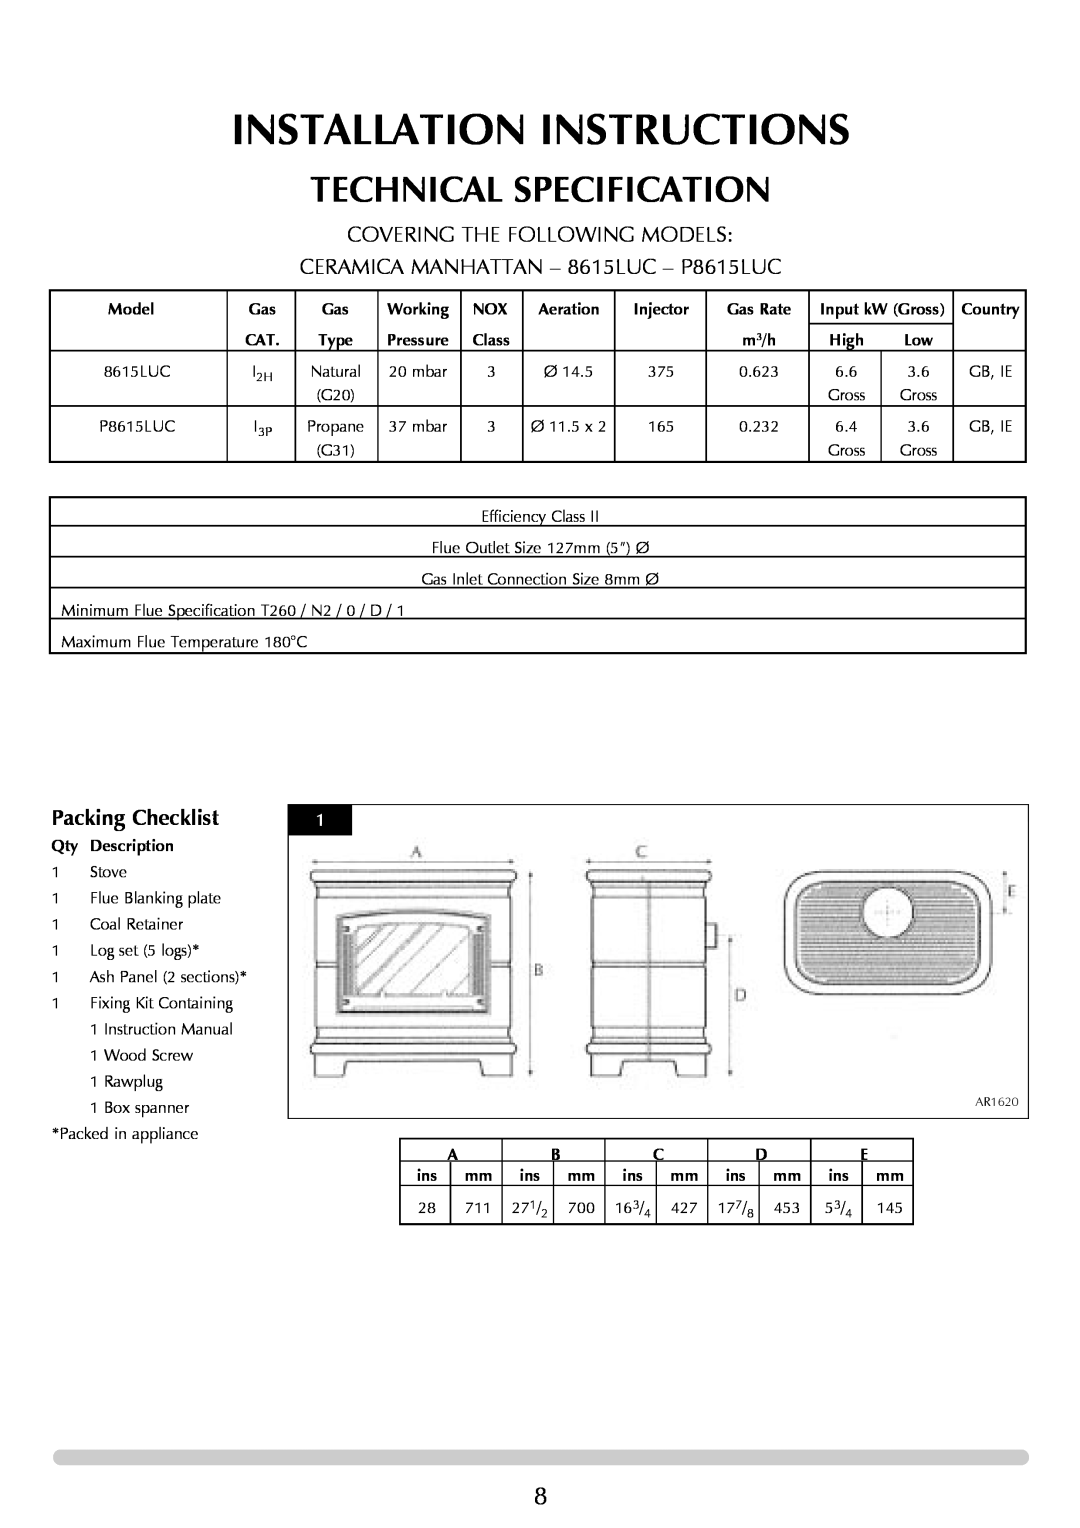 Stovax Gazco Ceremica Log Effect Stove Range manual Installation Instructions, Technical Specification, Packing Checklist 